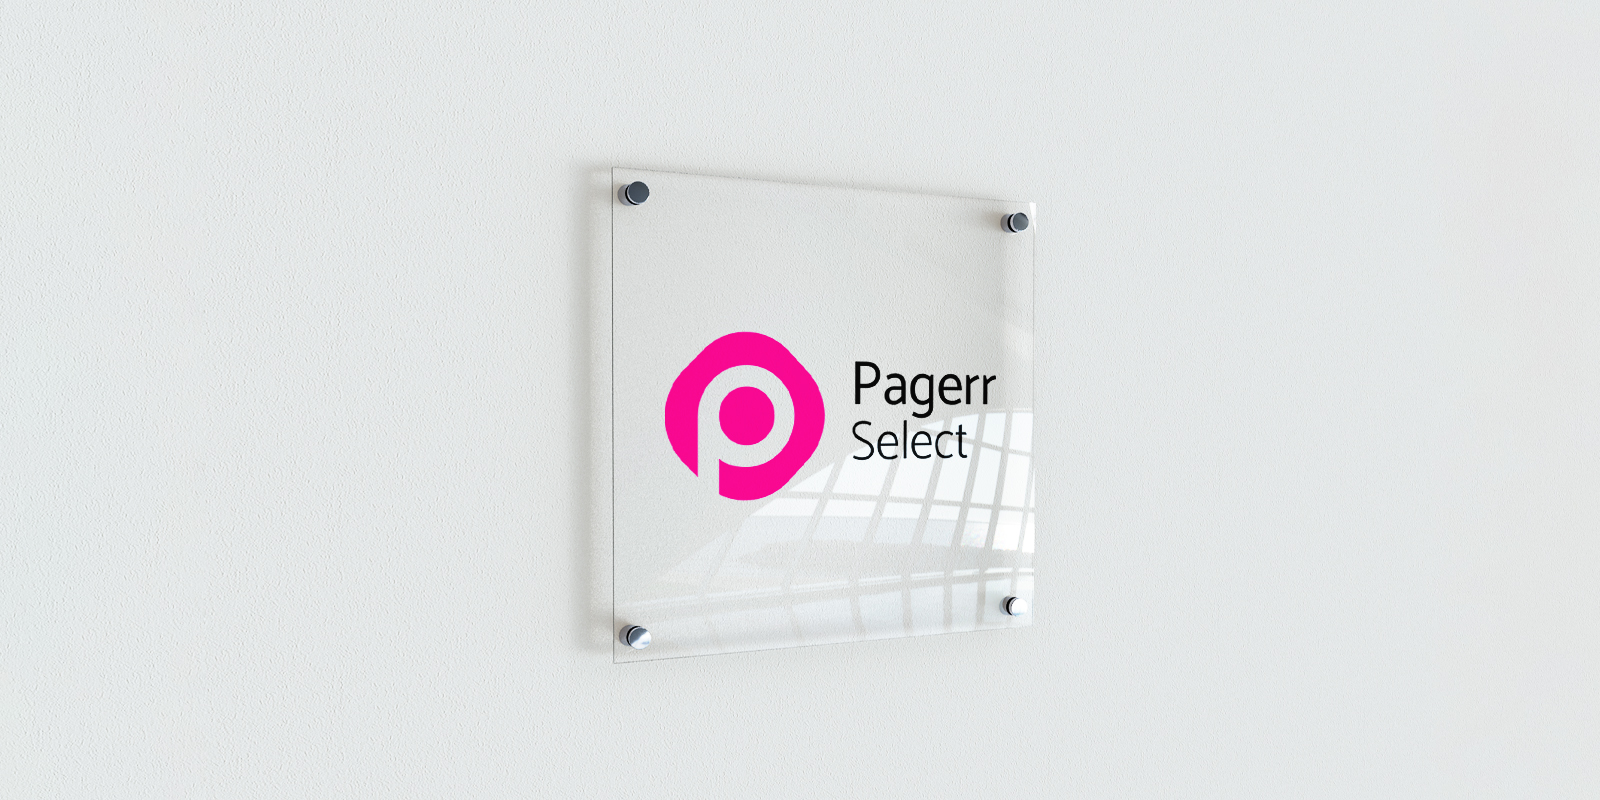 Acrylic signs in Mandurah - Print with Pagerr